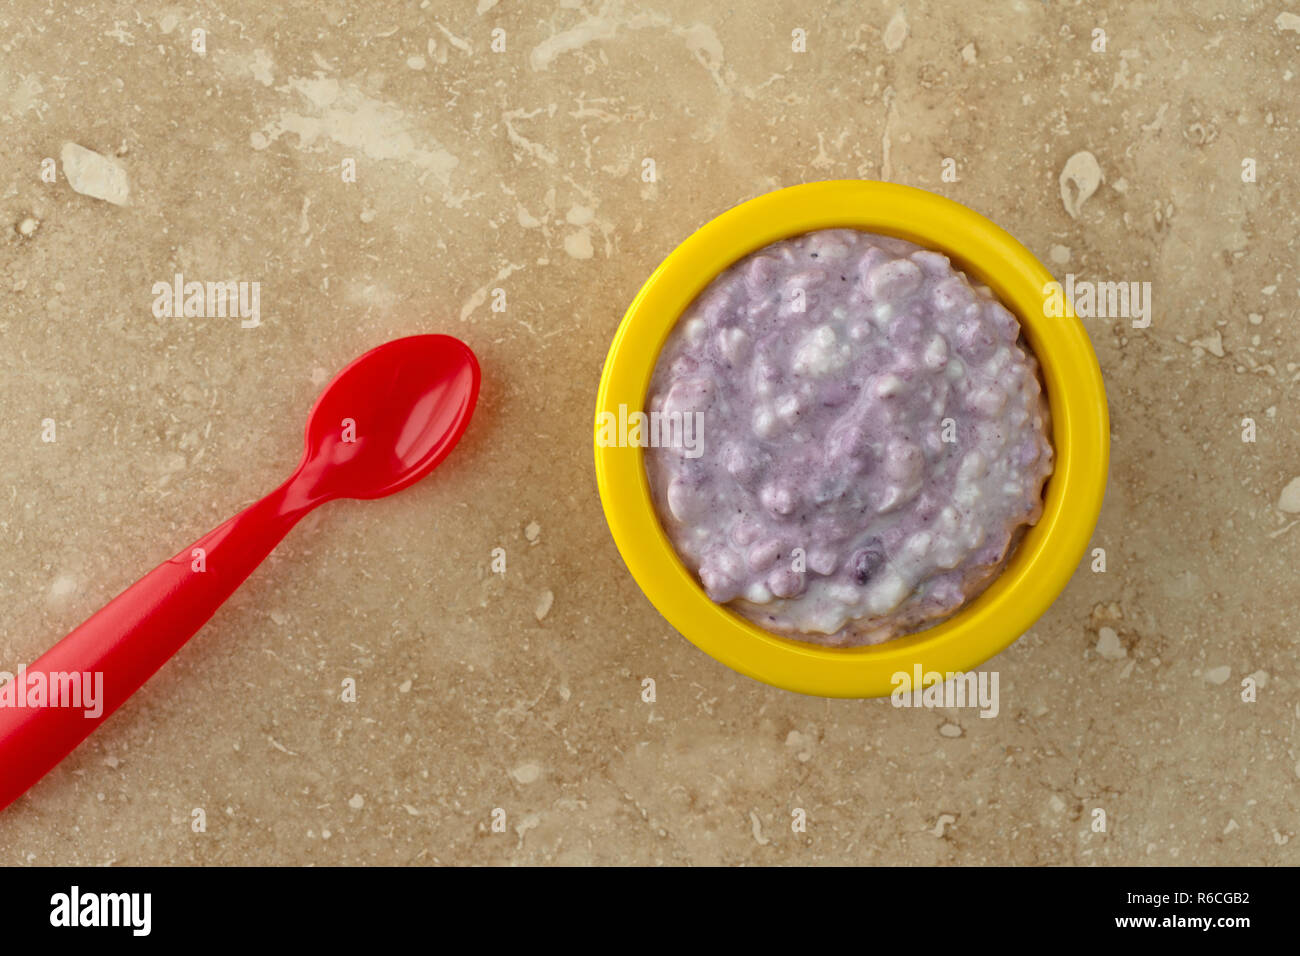 Overhead view of a small yellow bowl filled with blueberries and cottage cheese plus a red spoon atop a beige mottled tile. Stock Photo